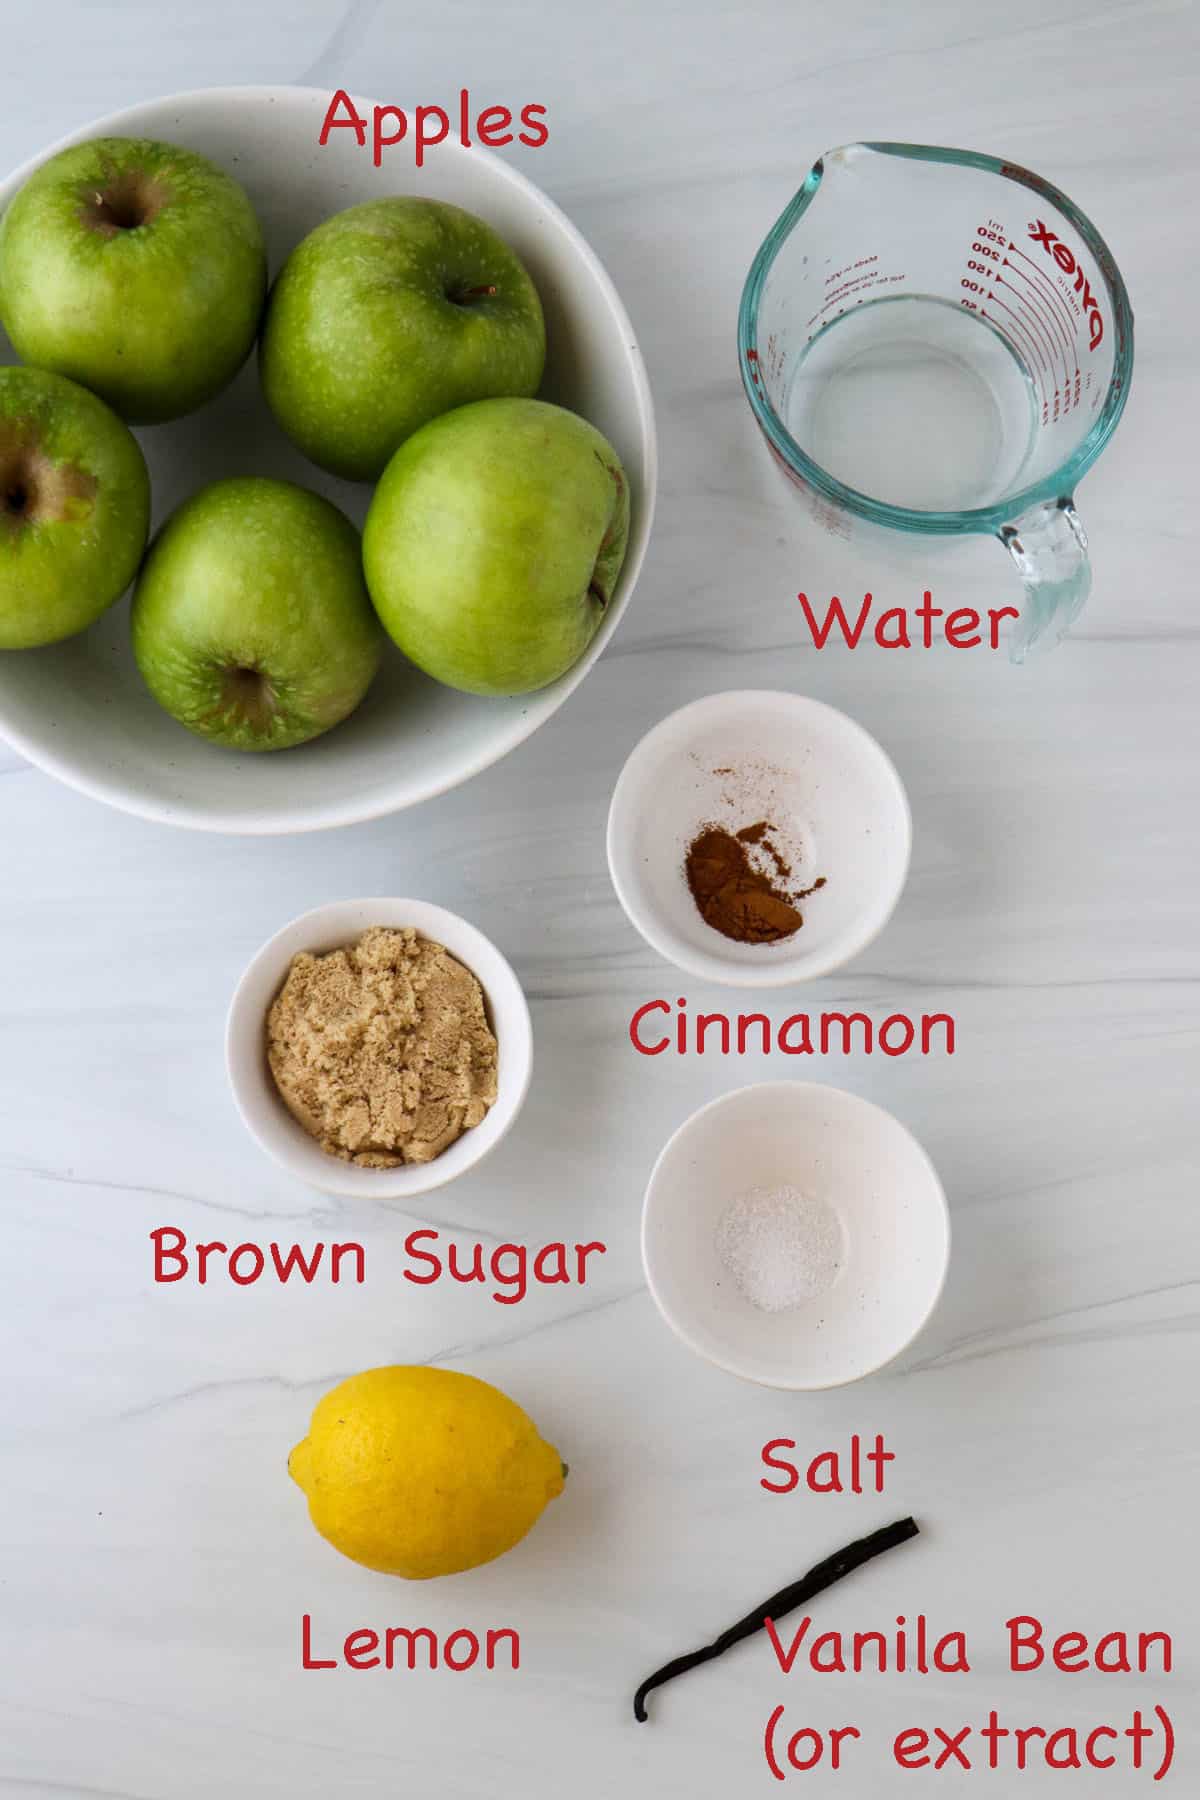 Labeled ingredients for Apple Compote.